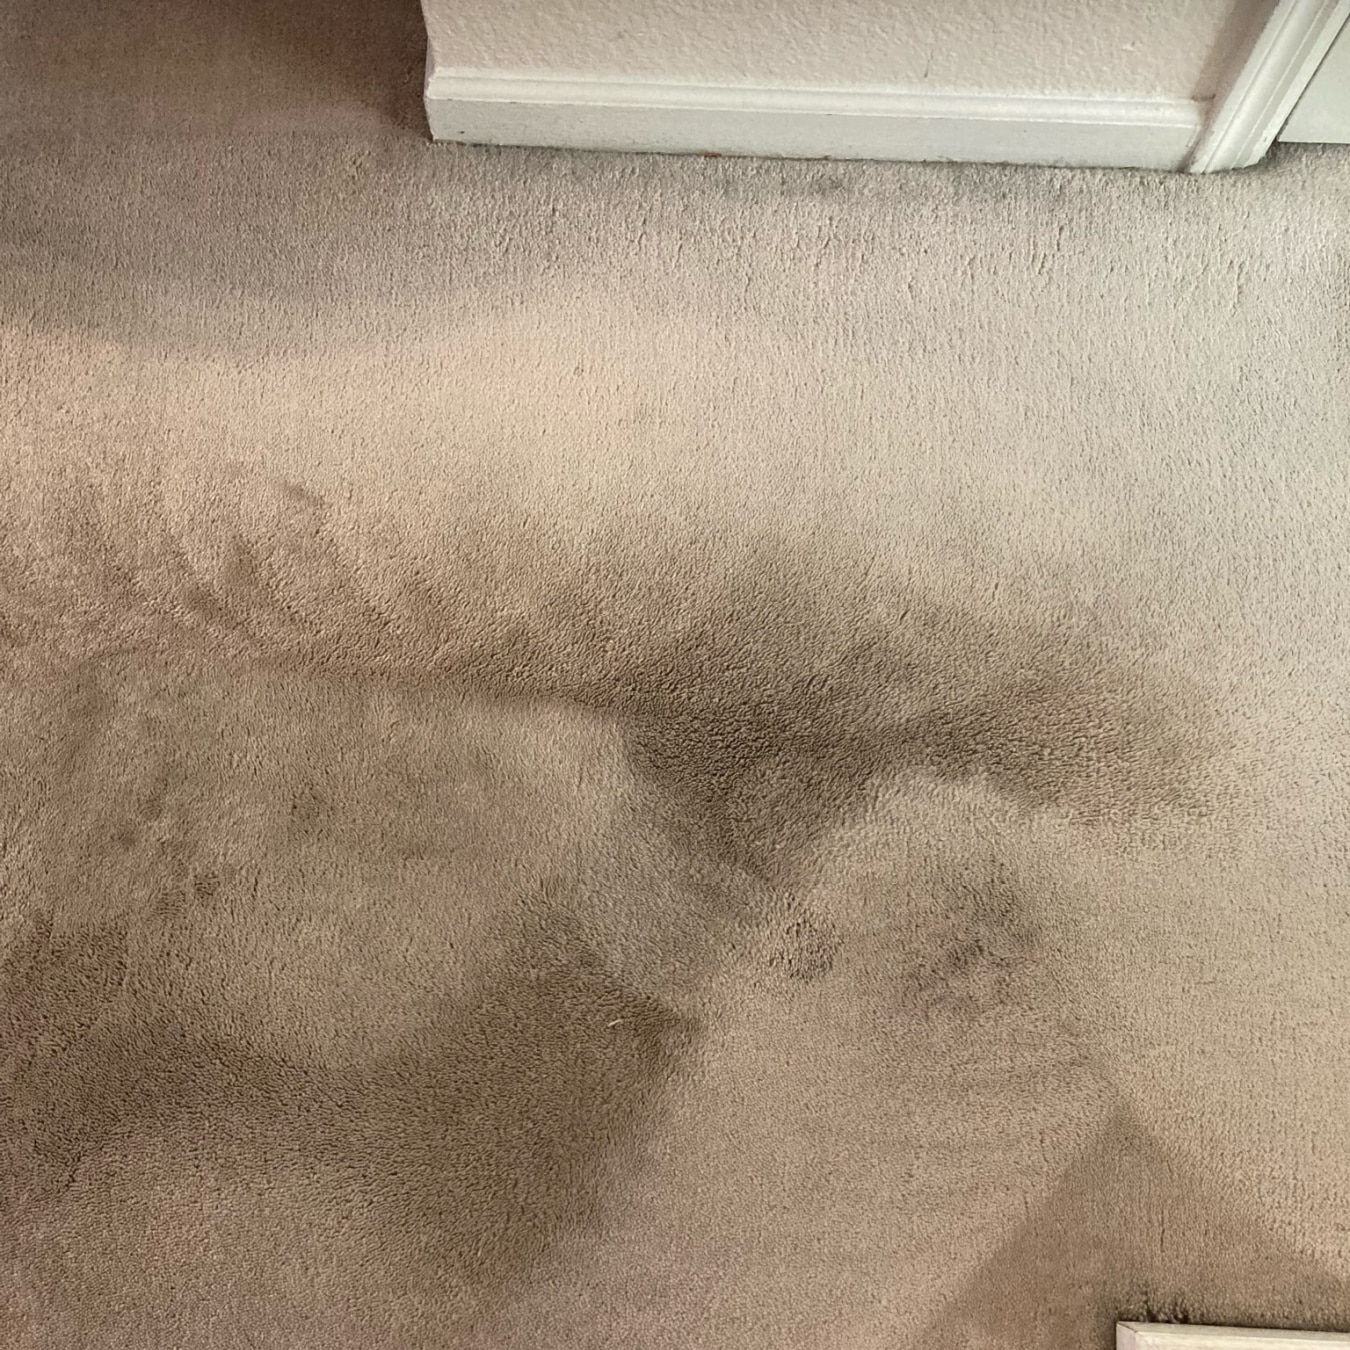 deep carpet cleaning in Scottsdale